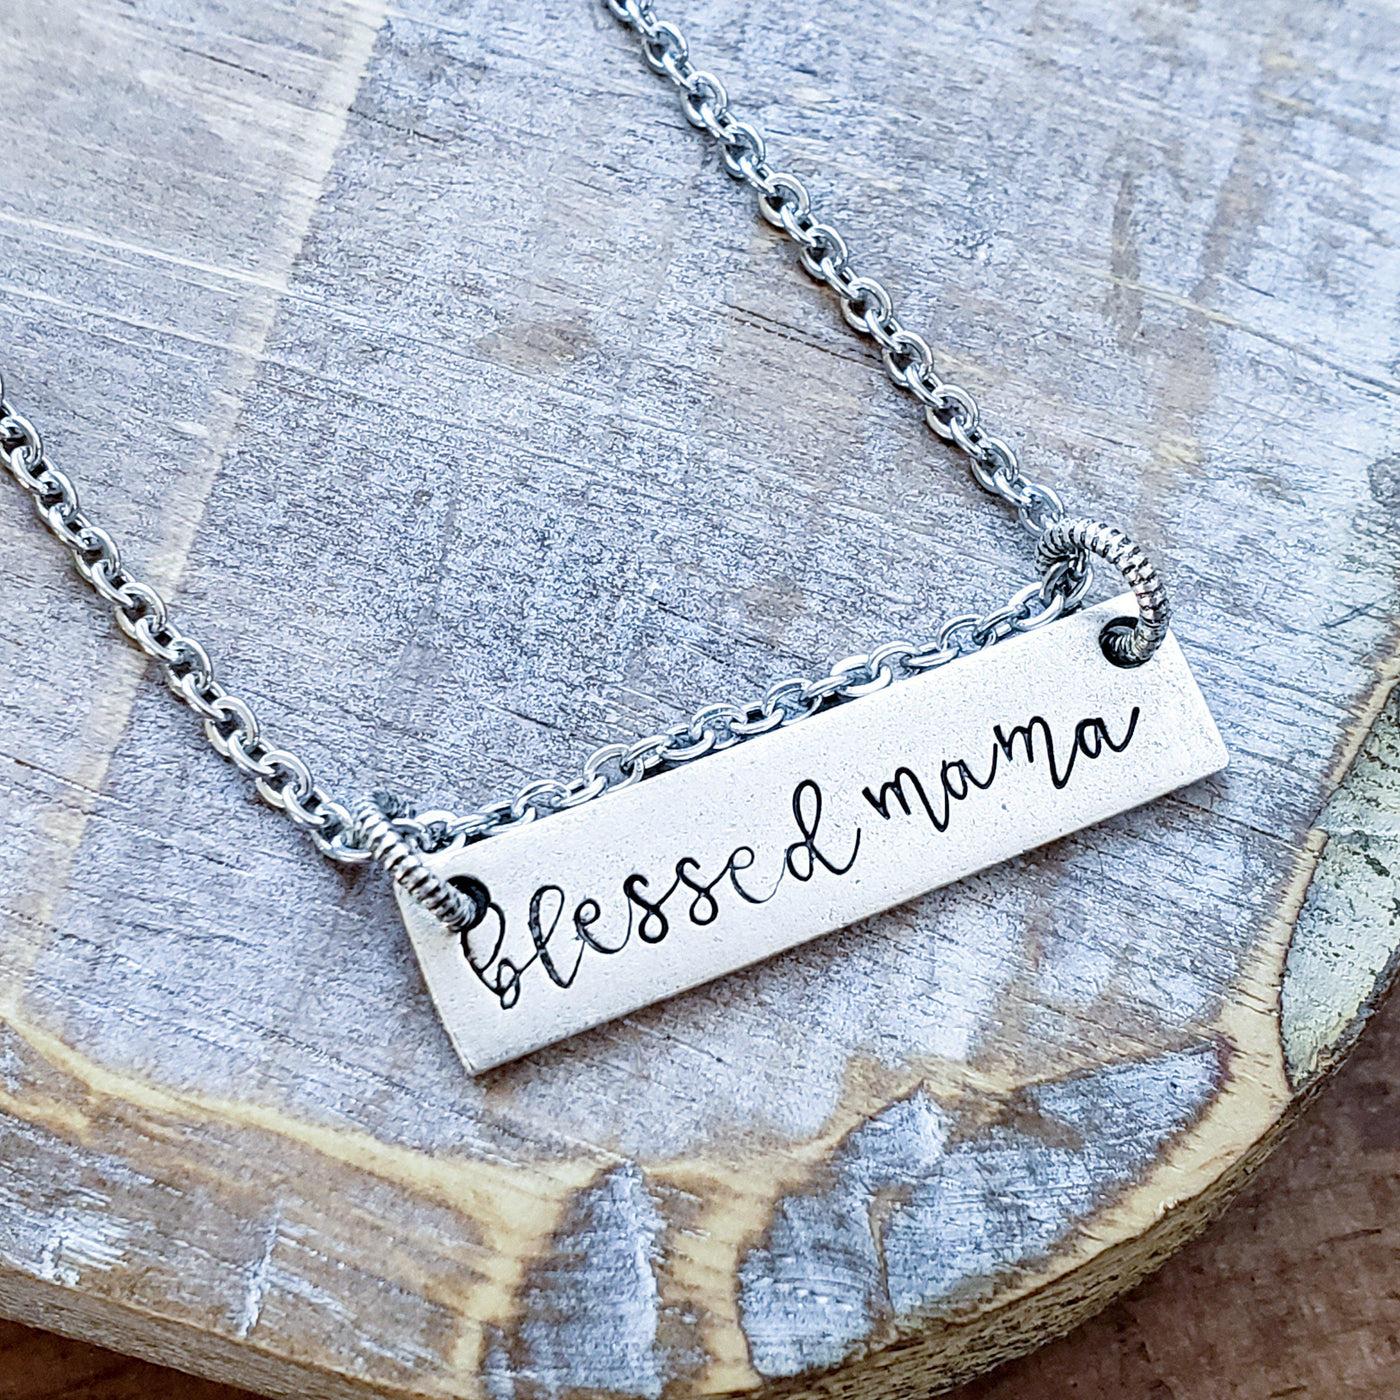 Blessed Mama - Little Blue Bus Jewelry